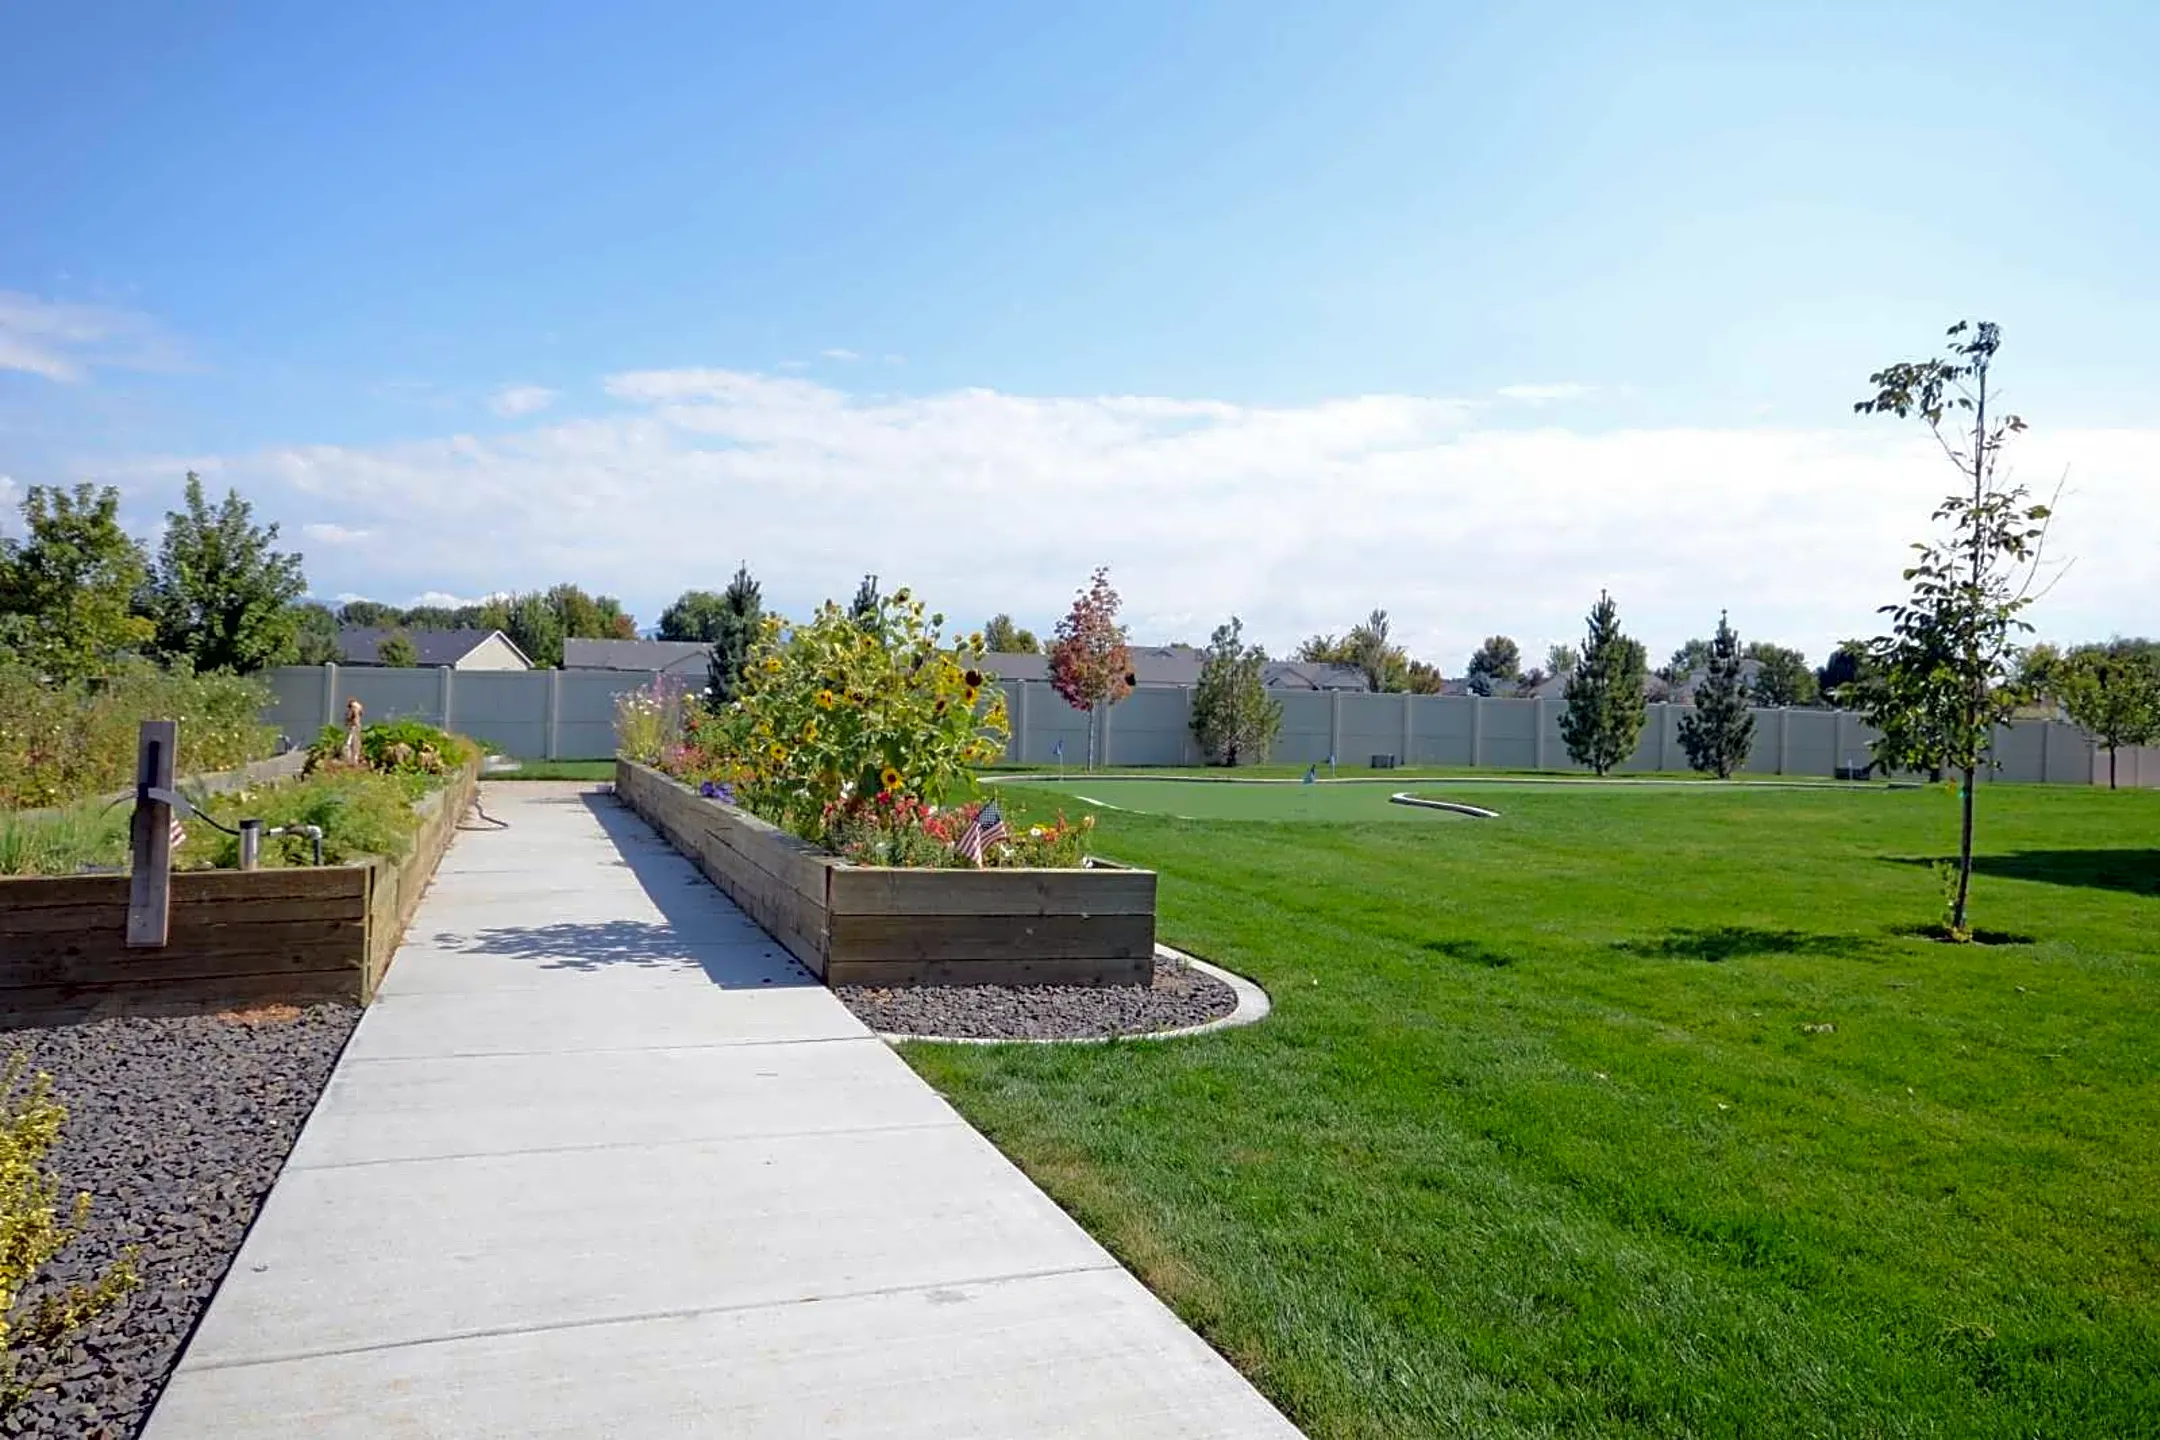 Landscaping - Affinity at Boise 55+ Living - Boise, ID